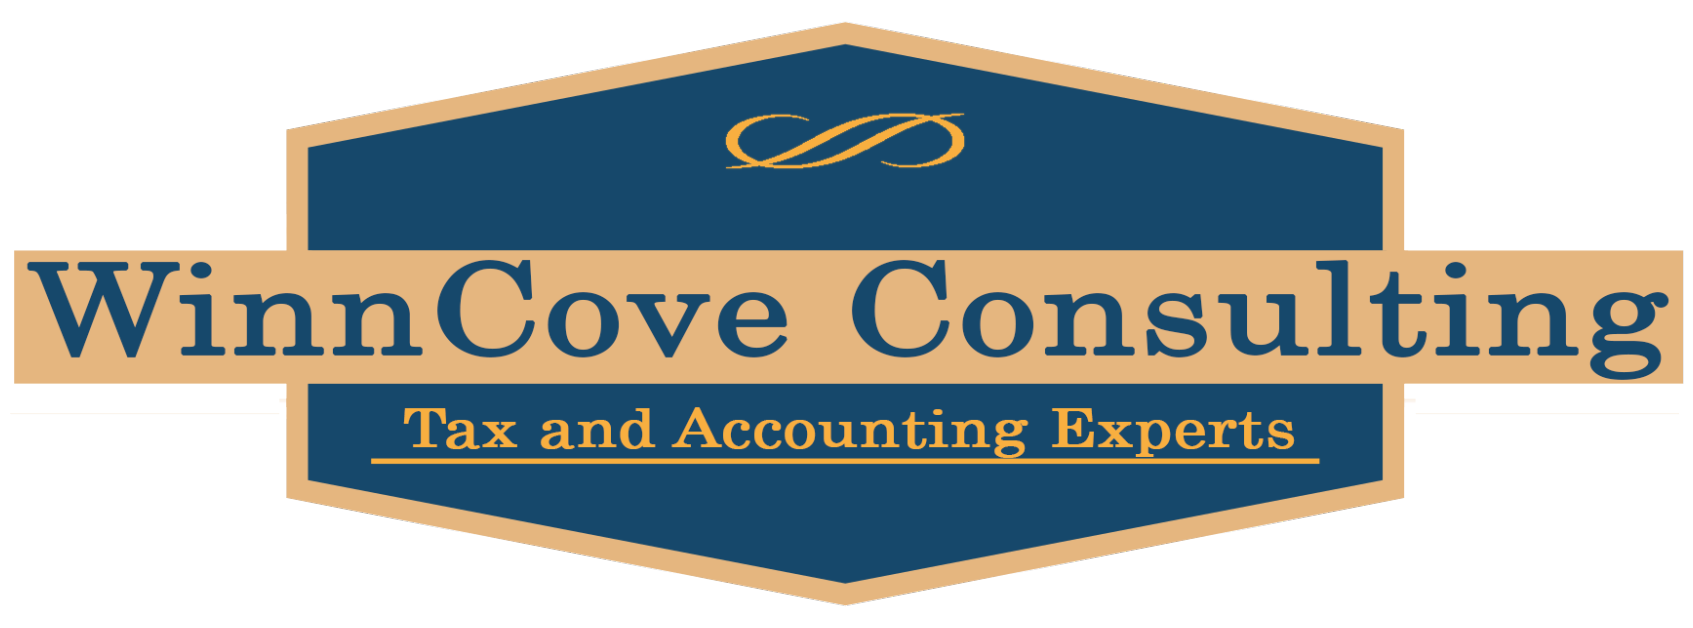 WinnCove Consulting